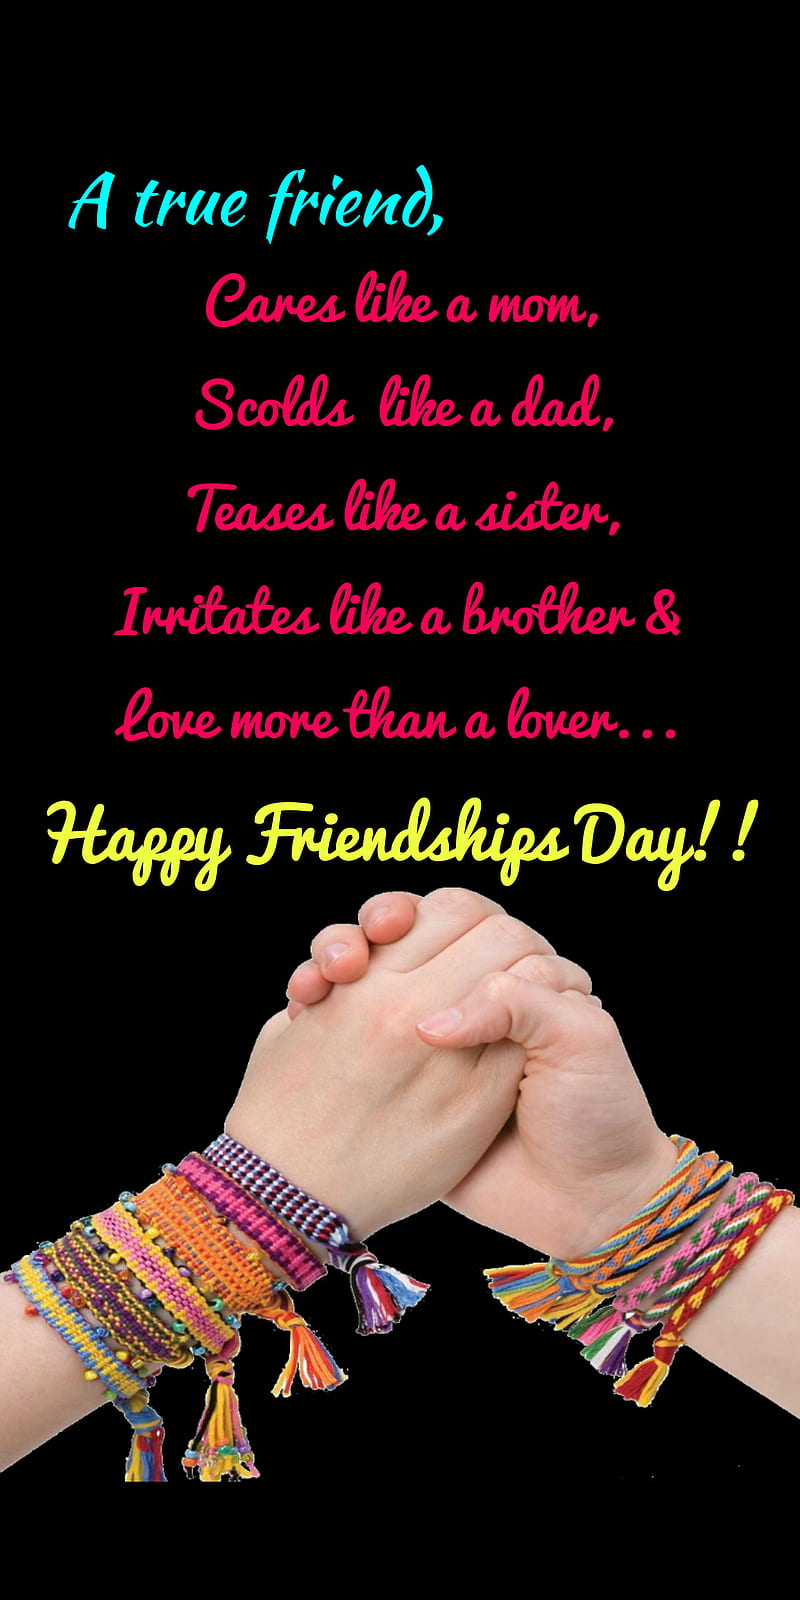 Friendship Day HD Images Wallpaper Pics Photos Free Download  Happy  friendship Happy friendship day photos Friendship day images